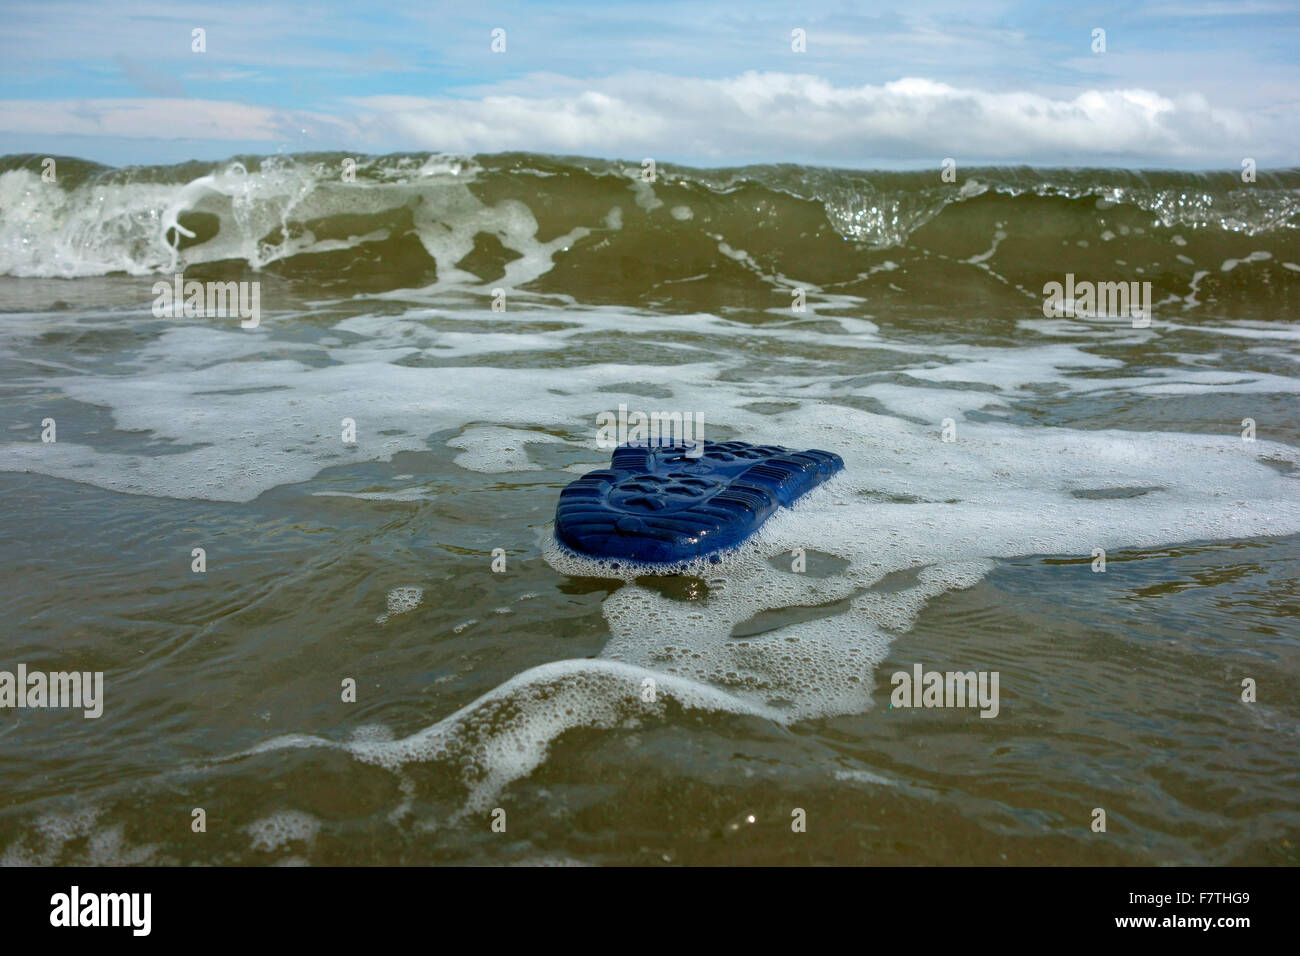 All that remains of a drowning victim at sea is a shoe floating on the surface of the waves Stock Photo